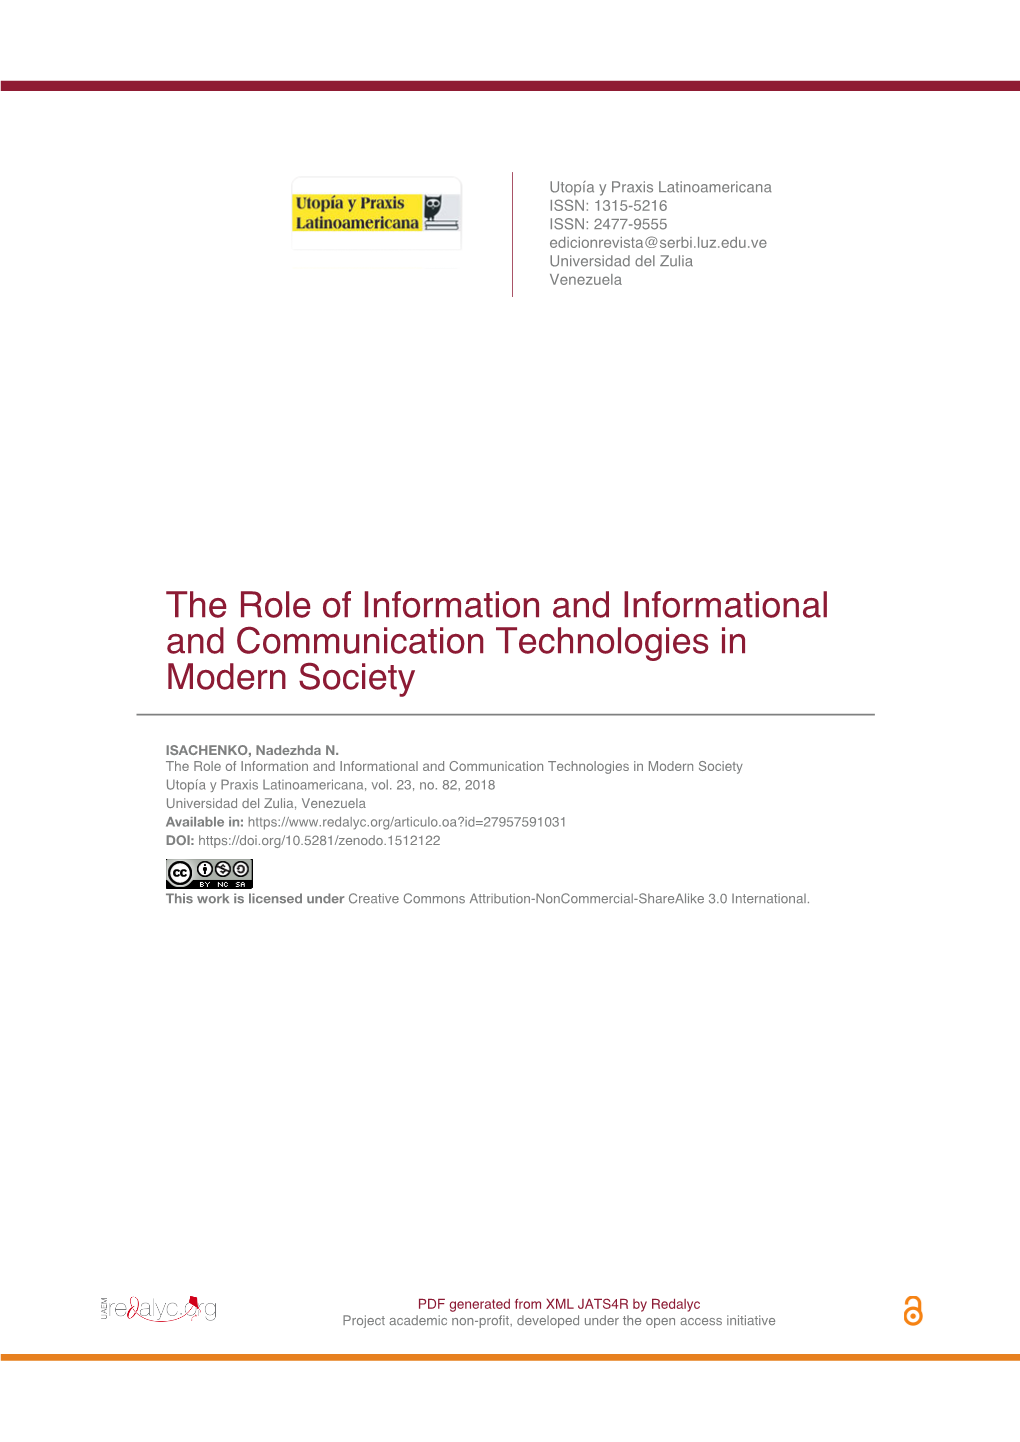 The Role of Information and Informational and Communication Technologies in Modern Society